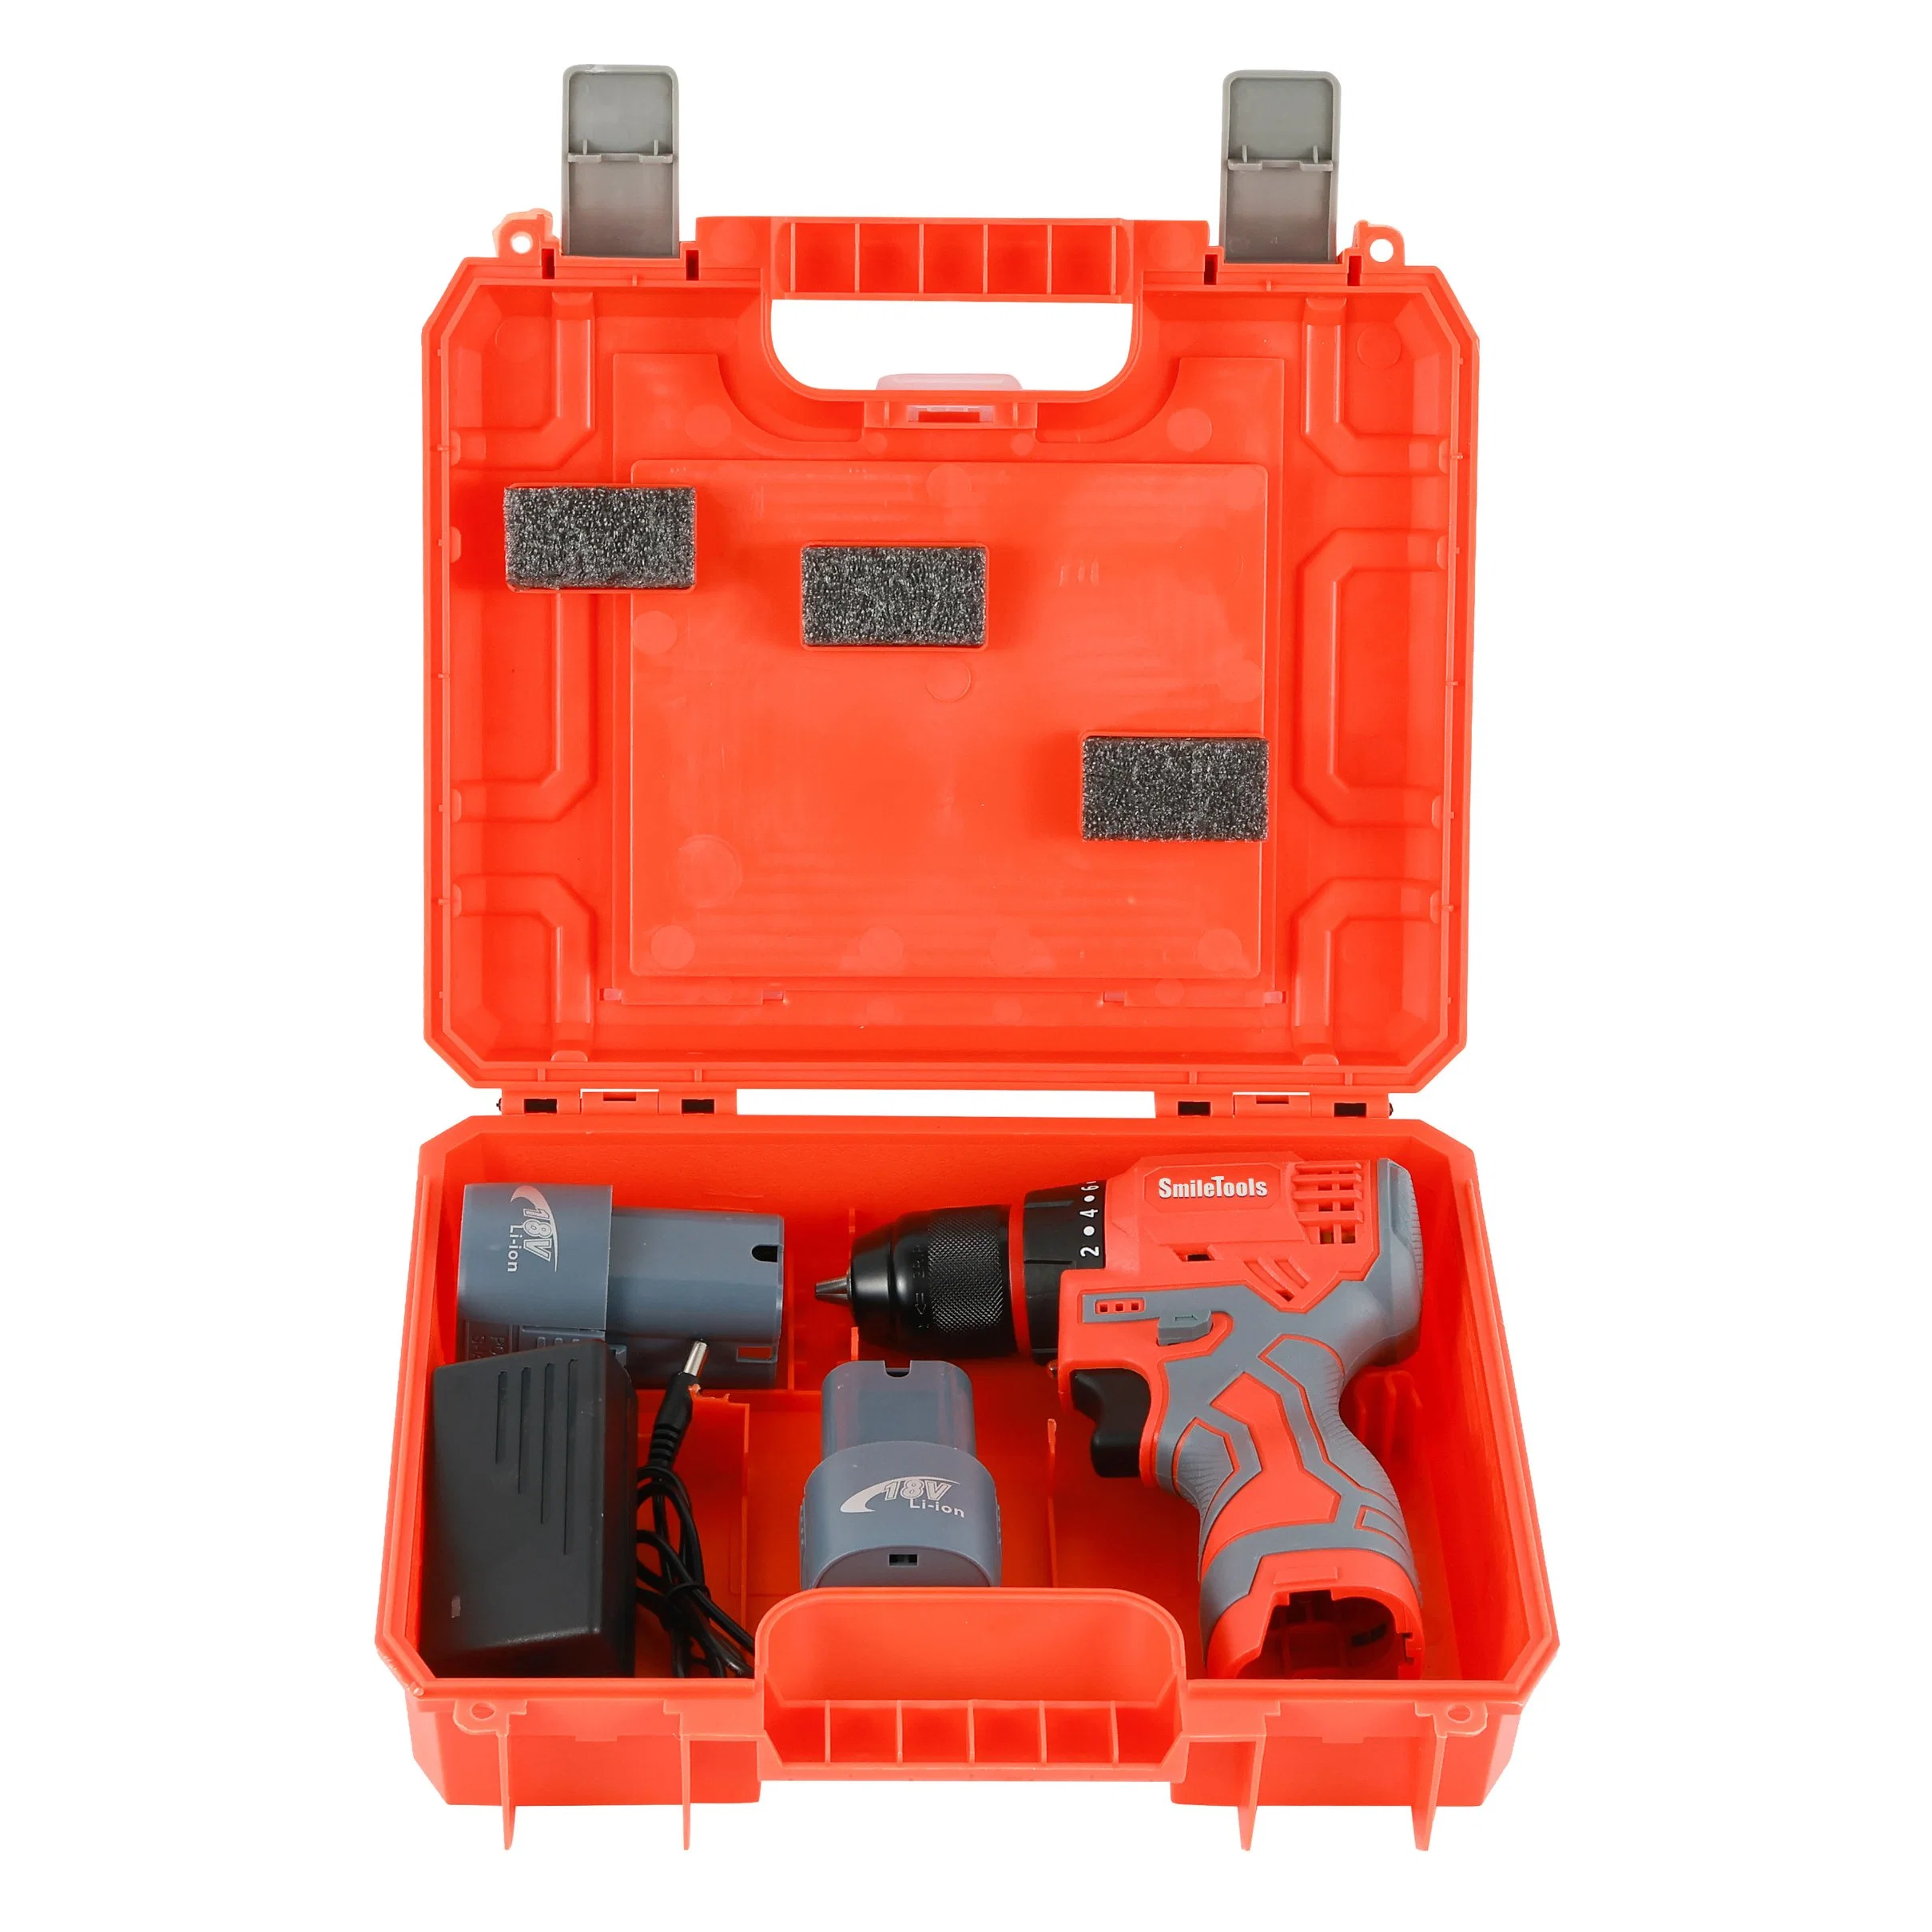 OEM Cordless Drill Wholesale 20V Electric Hammer Drill, Versatile Electric Drill Machine Set